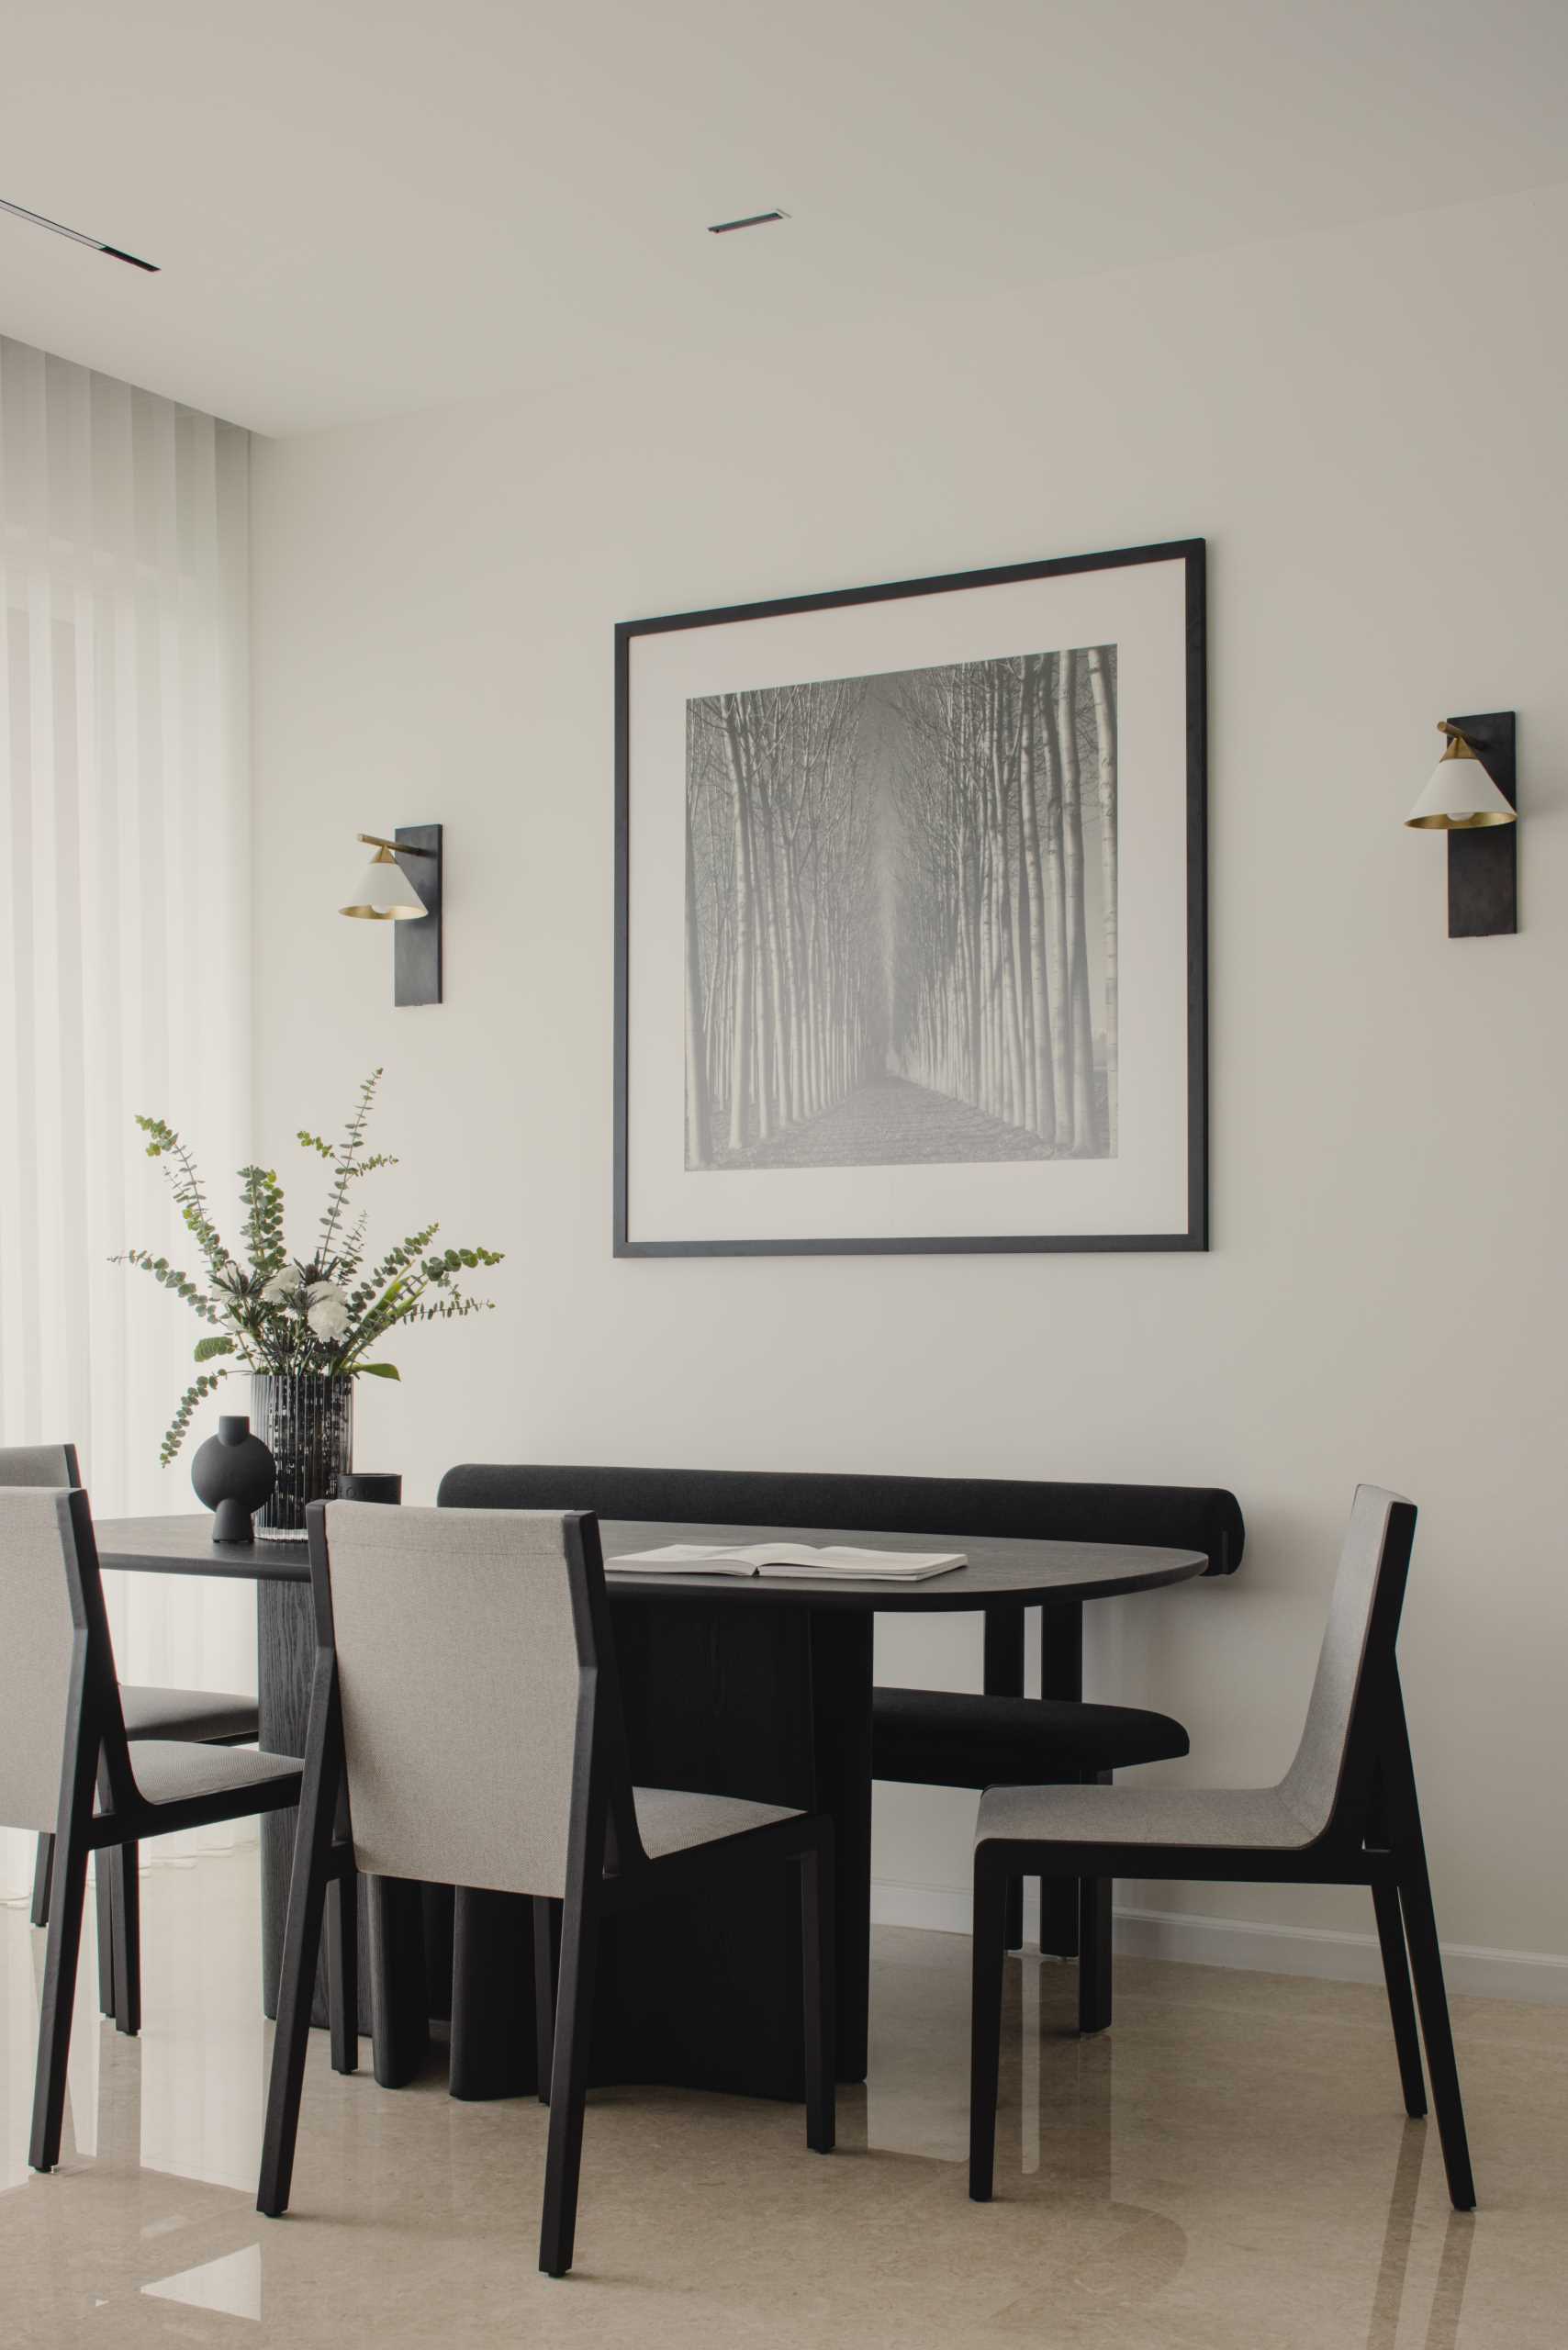 This modern and monochrome dining area is located behind the living room and includes a black dining table with a sculptural base, black and grey dining chairs, a black bench, black and white artwork, and wall lights with a brushed gold accent.